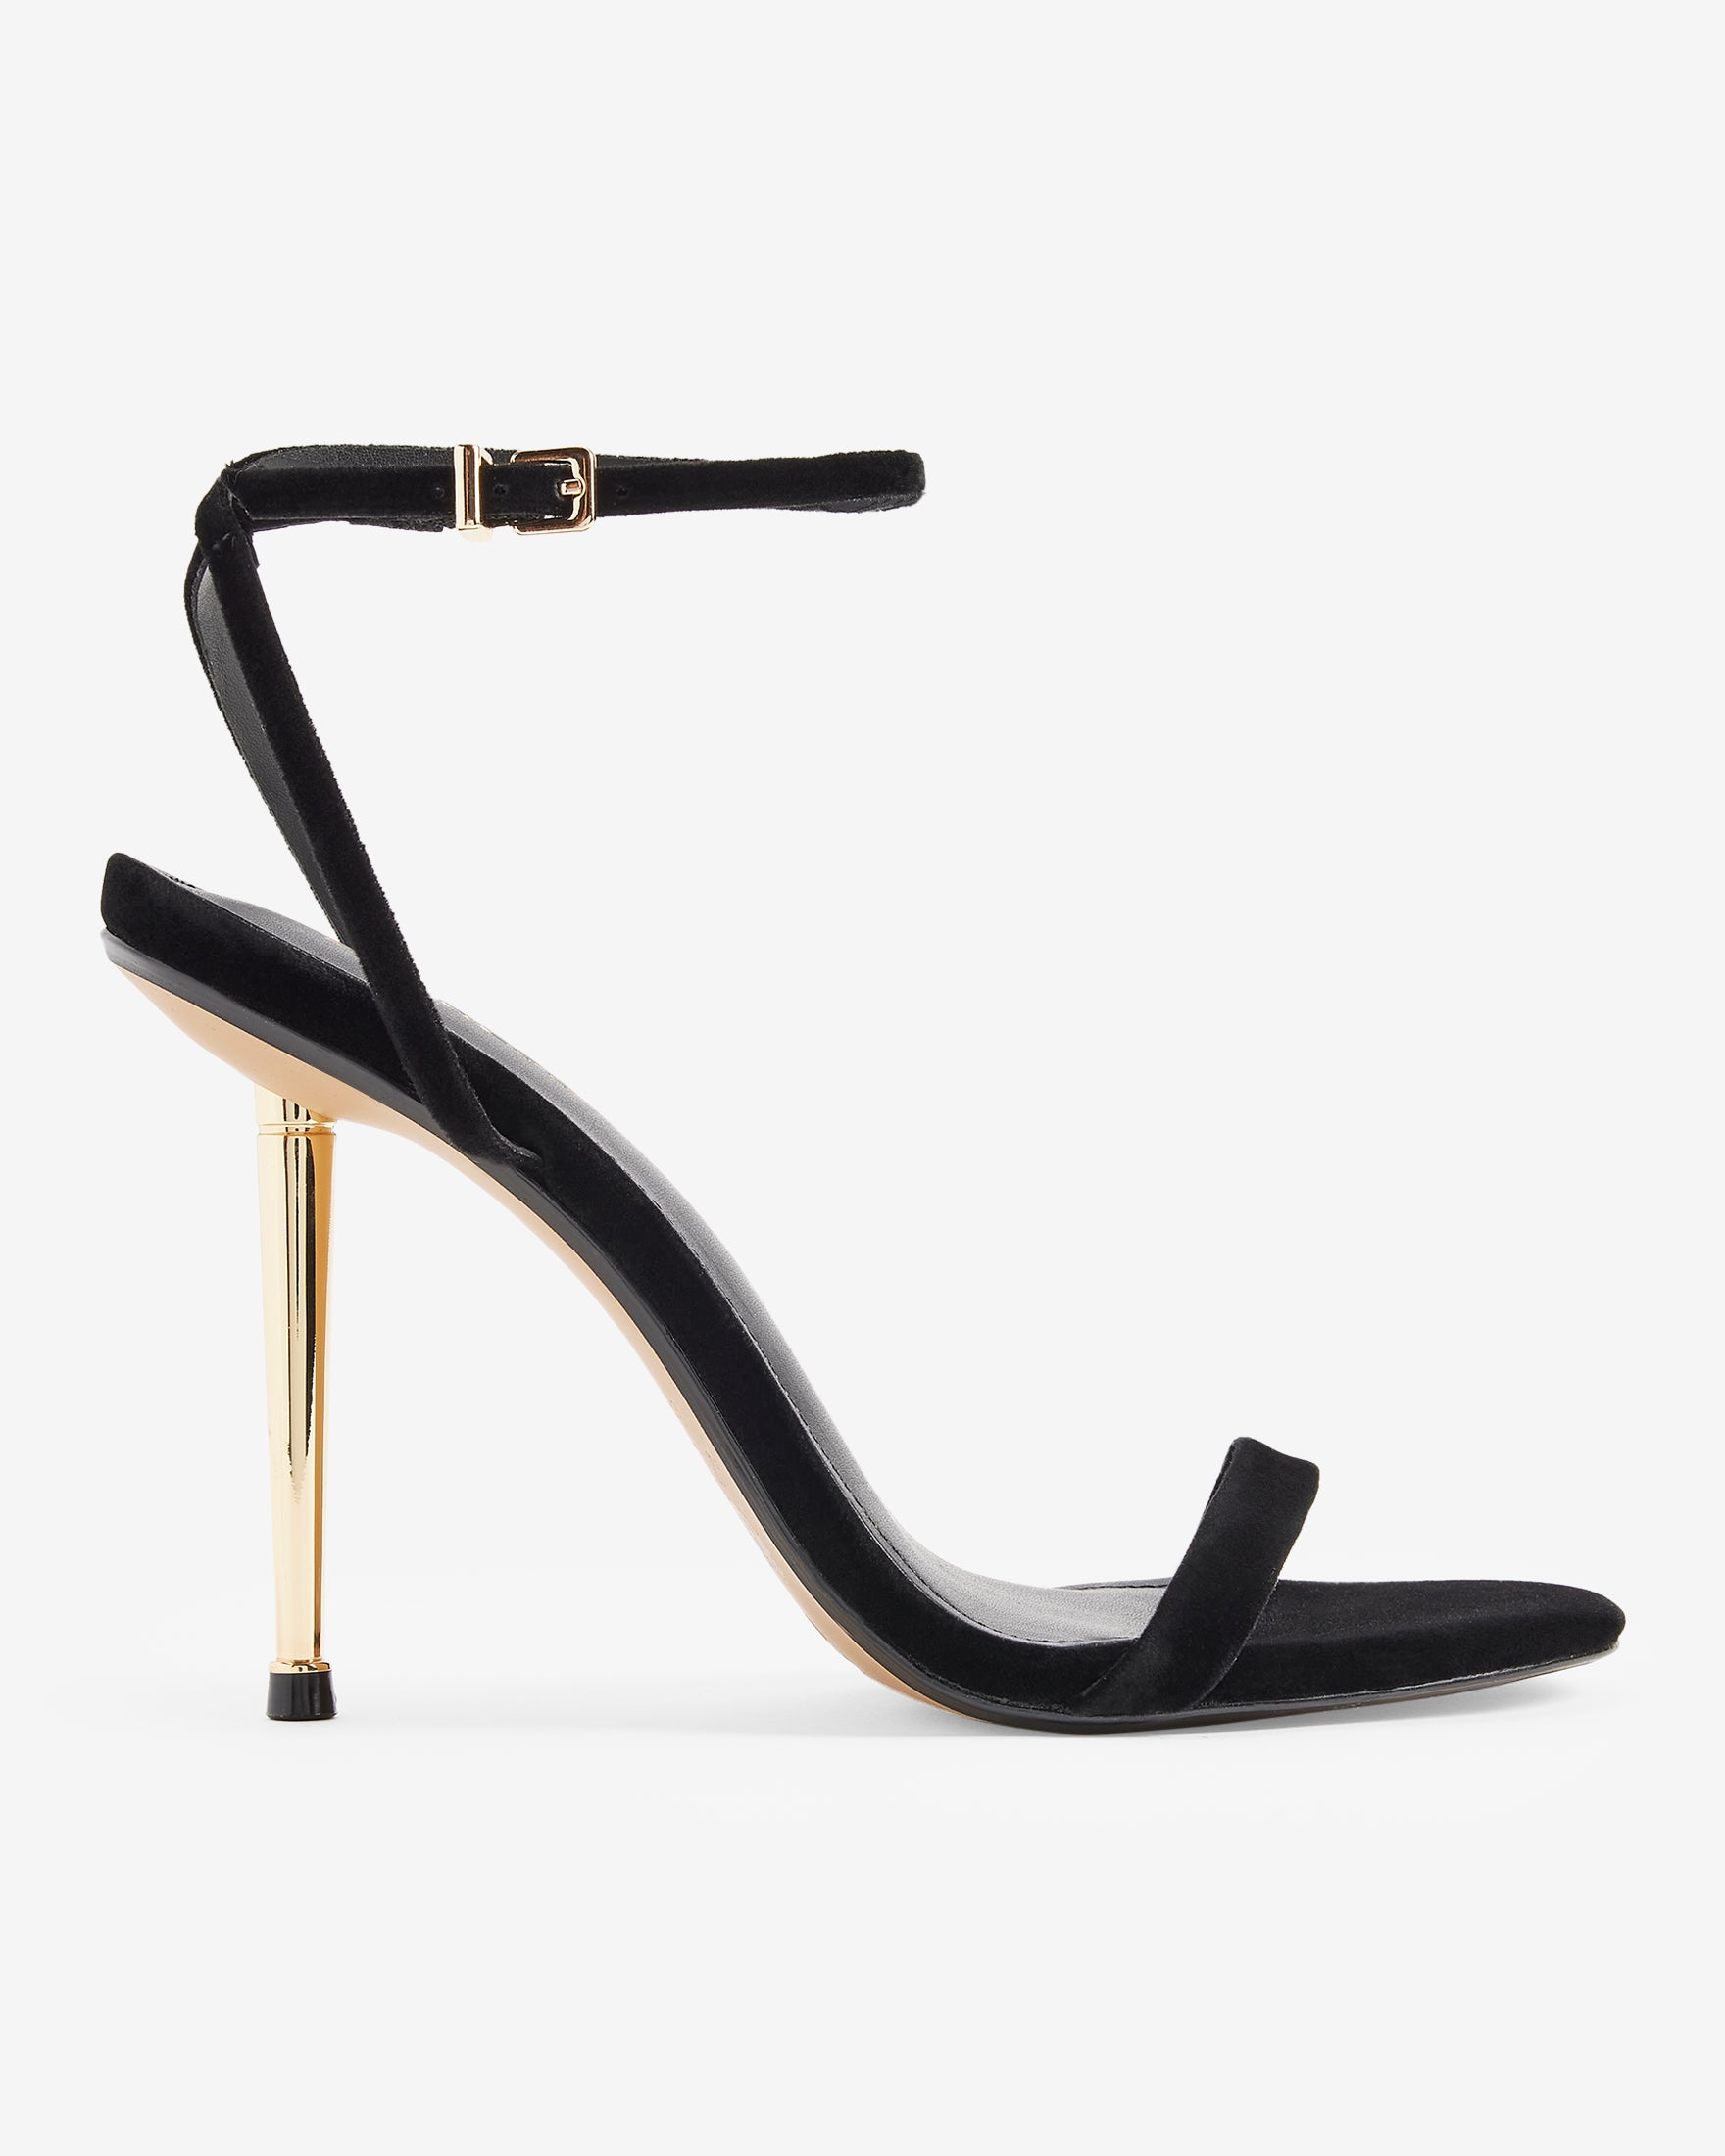 Black open-toed shoes with thin gold heel